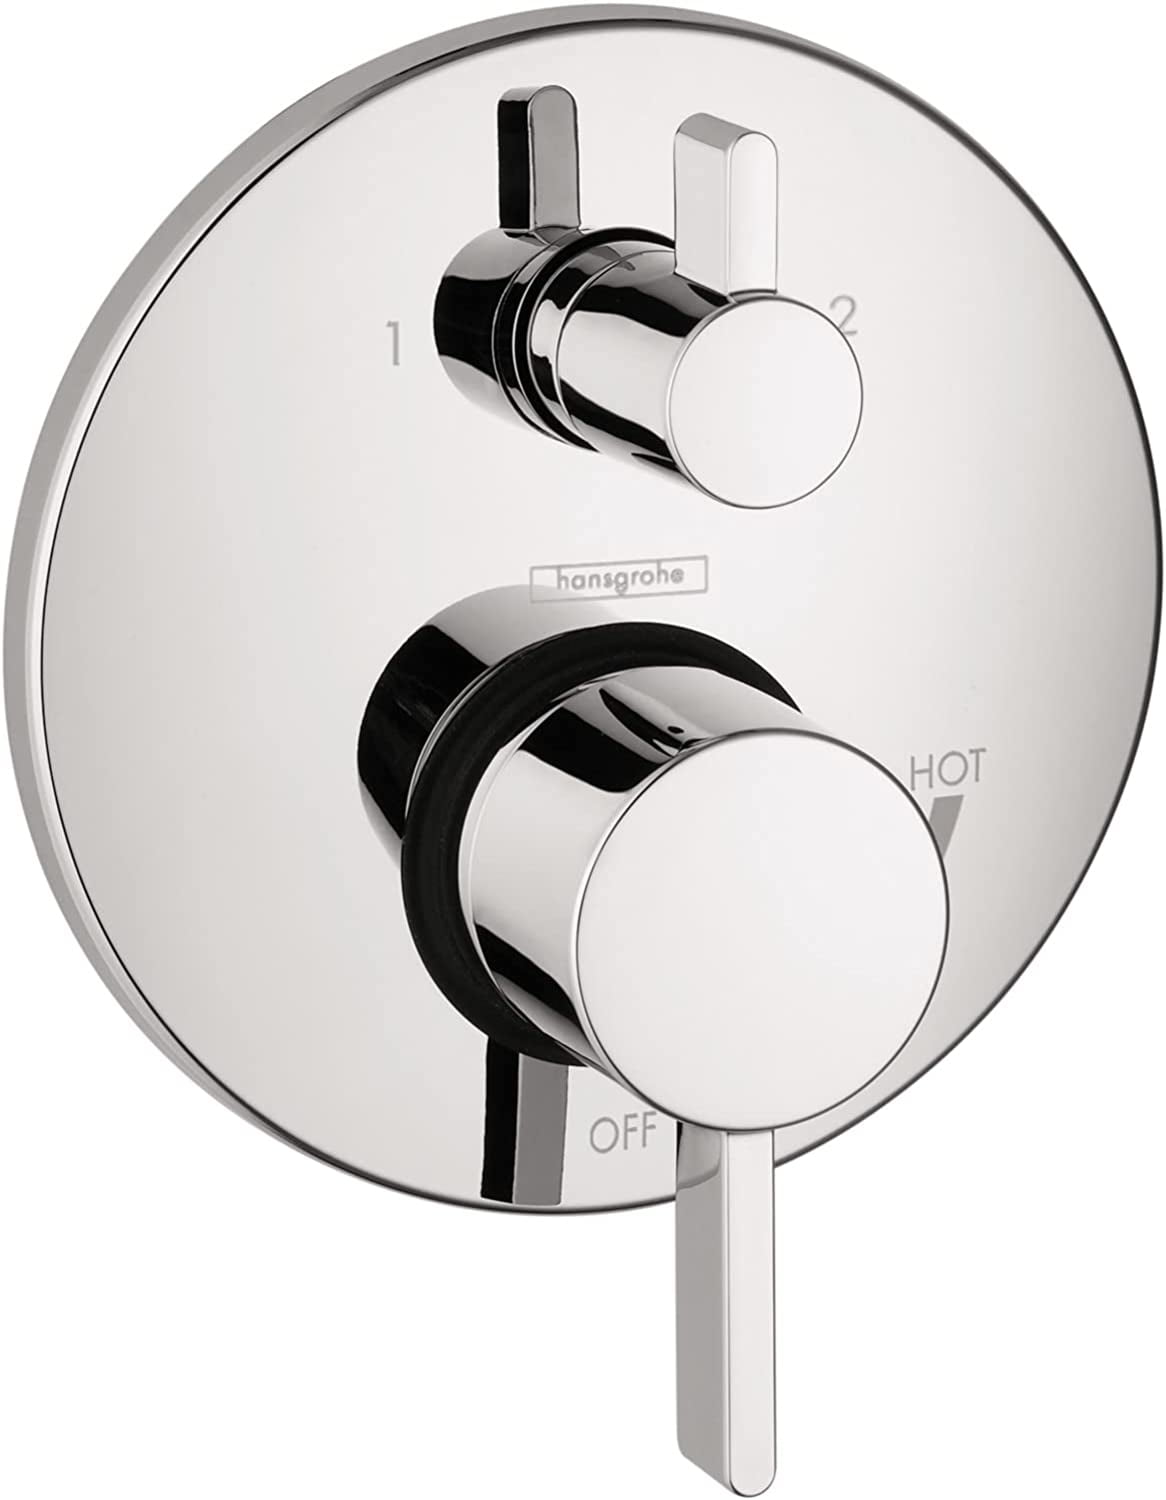 hansgrohe RainSelect trim set for 2 outlets, concealed chrome